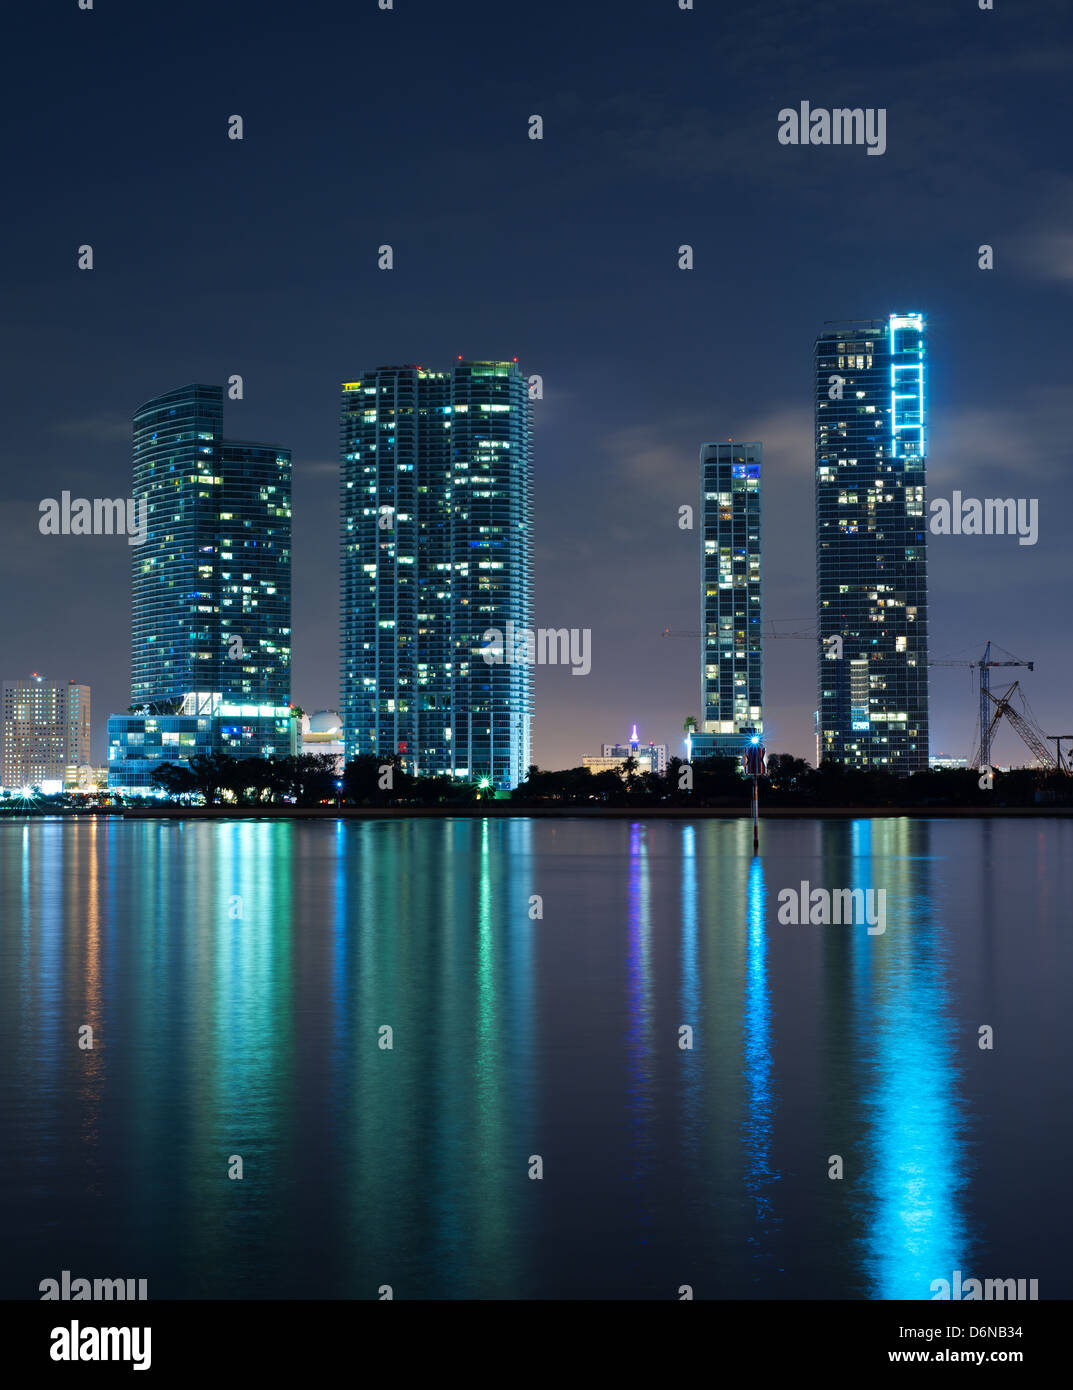 Marinablue, 900 Biscayne Bay, Ten Museum Park and Marquis Stock Photo